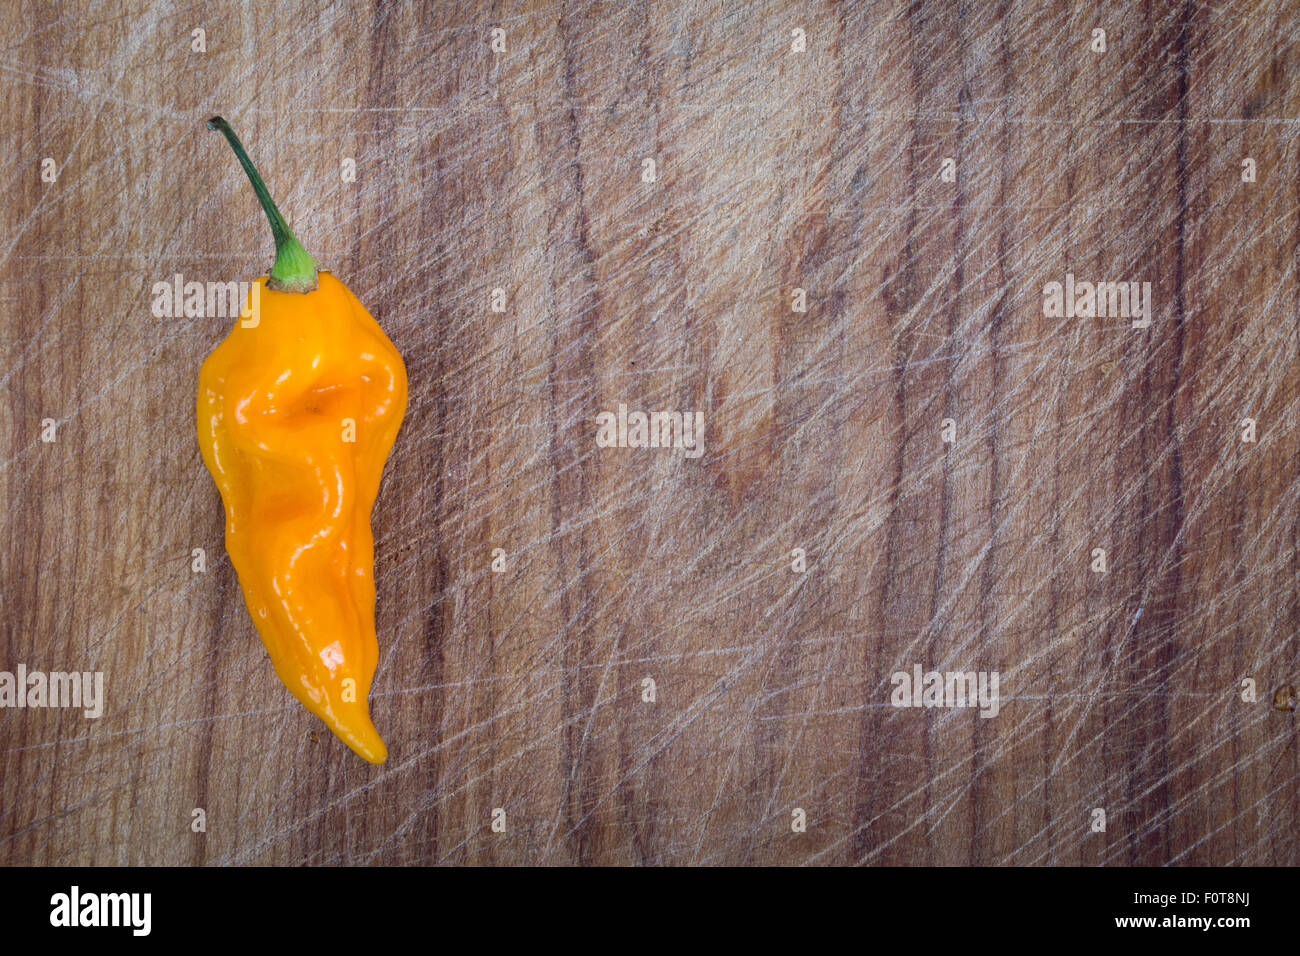 yellow fatalii chili pepper over wooden cutting board high angle view Stock Photo